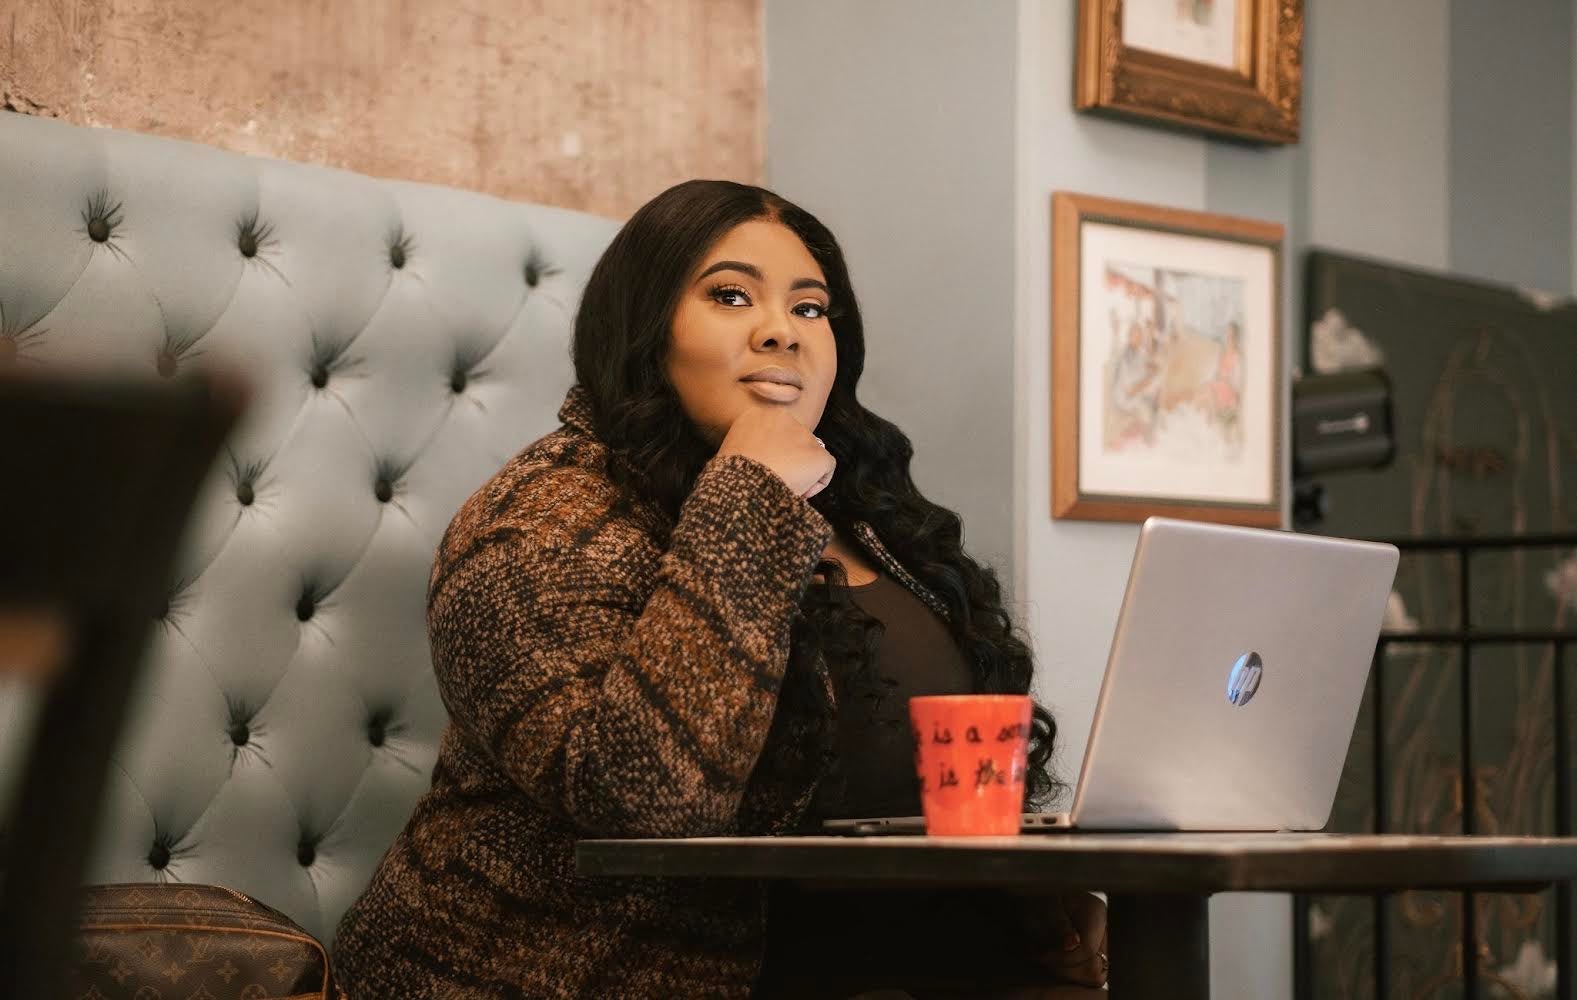 Meet Aye Yo Kells, The Woman Who’s Launching The First Black-Owned, All-Female Staffed Adoption Agency